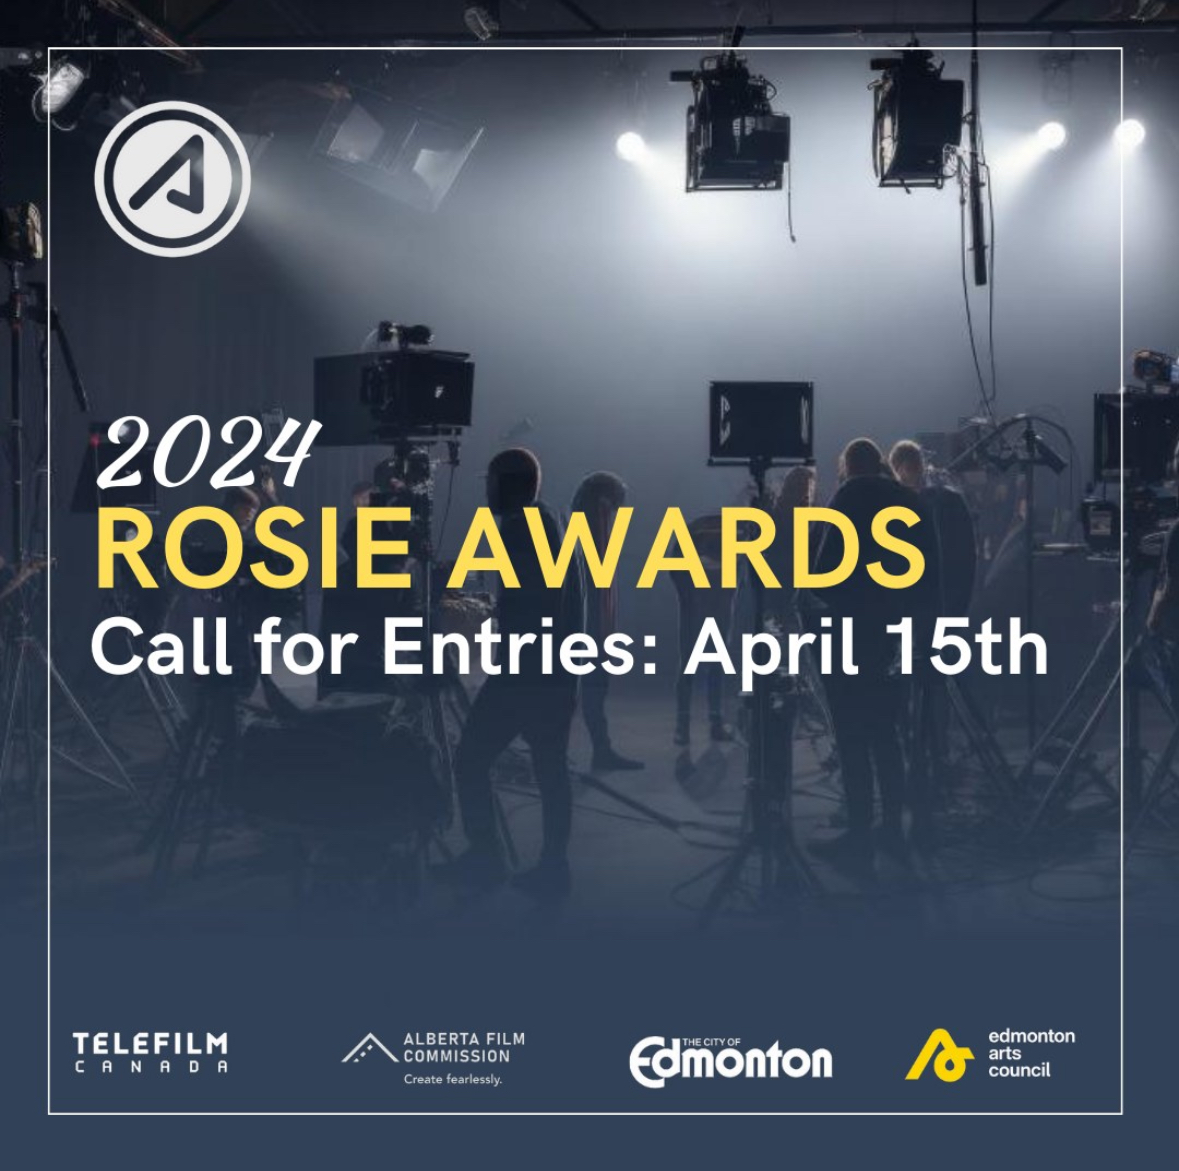 Nominations for @yourampia's Rosie Awards are now OPEN! 🟢 The Rosie Awards celebrate talent in Alberta's motion picture, television and digital content space. Submit your project for consideration at ampia.org. 🔗